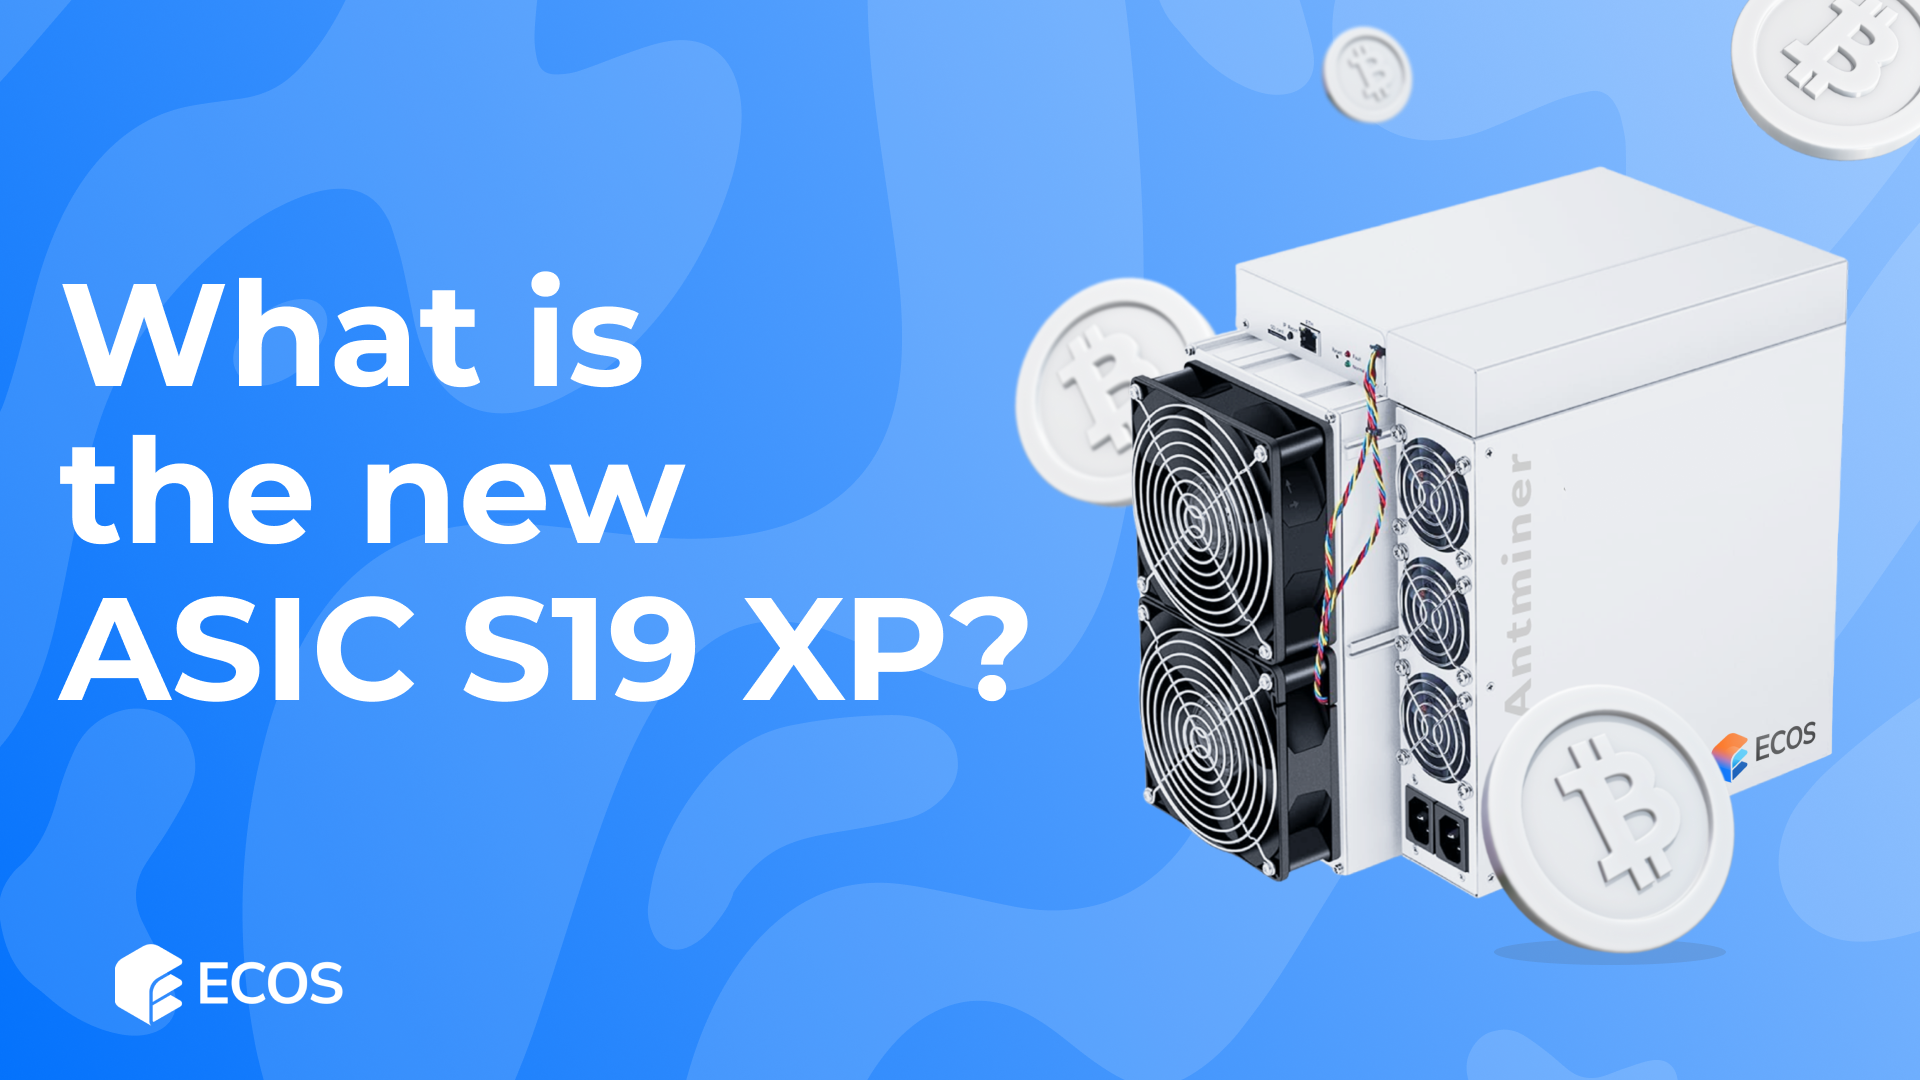 What is the new ASIC S19 XP